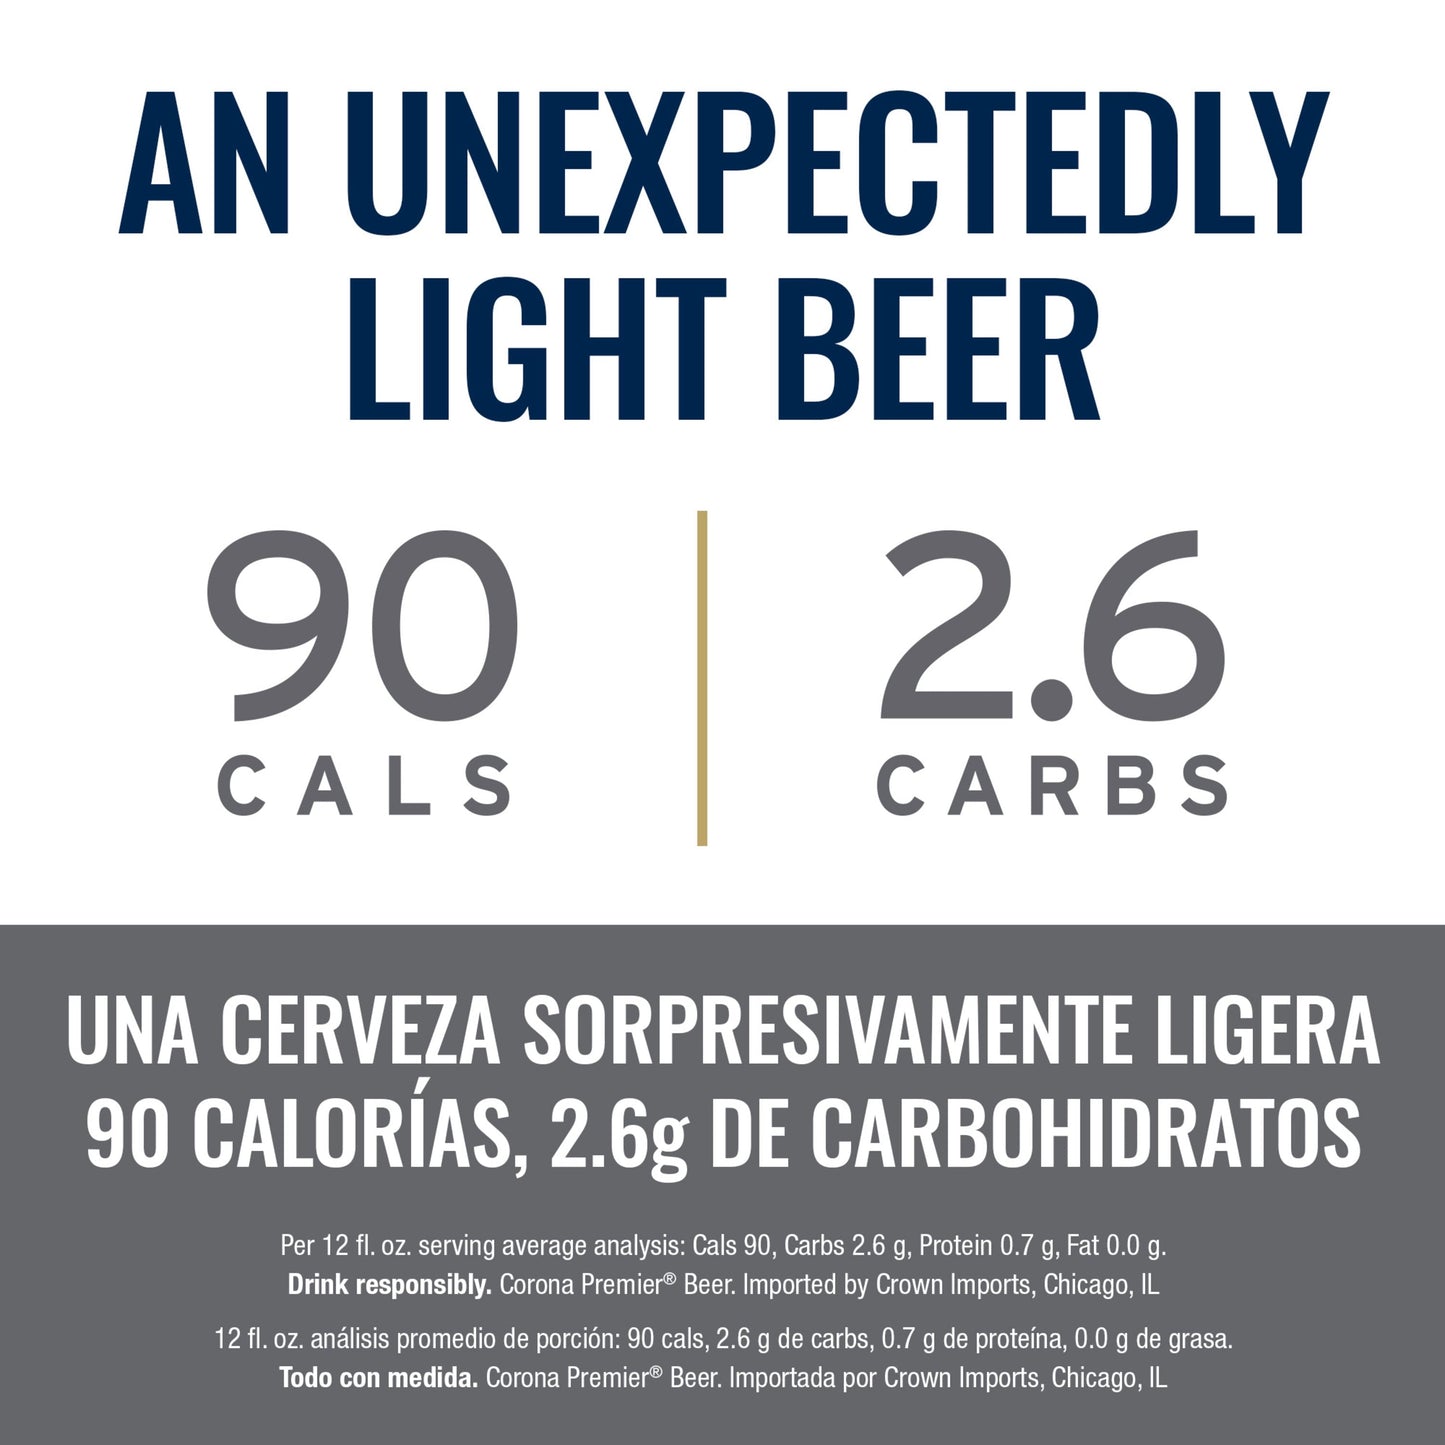 Corona Premier Mexican Lager Import Light Beer, 12 Pack Beer, 12 fl oz Cans, 4% ABV